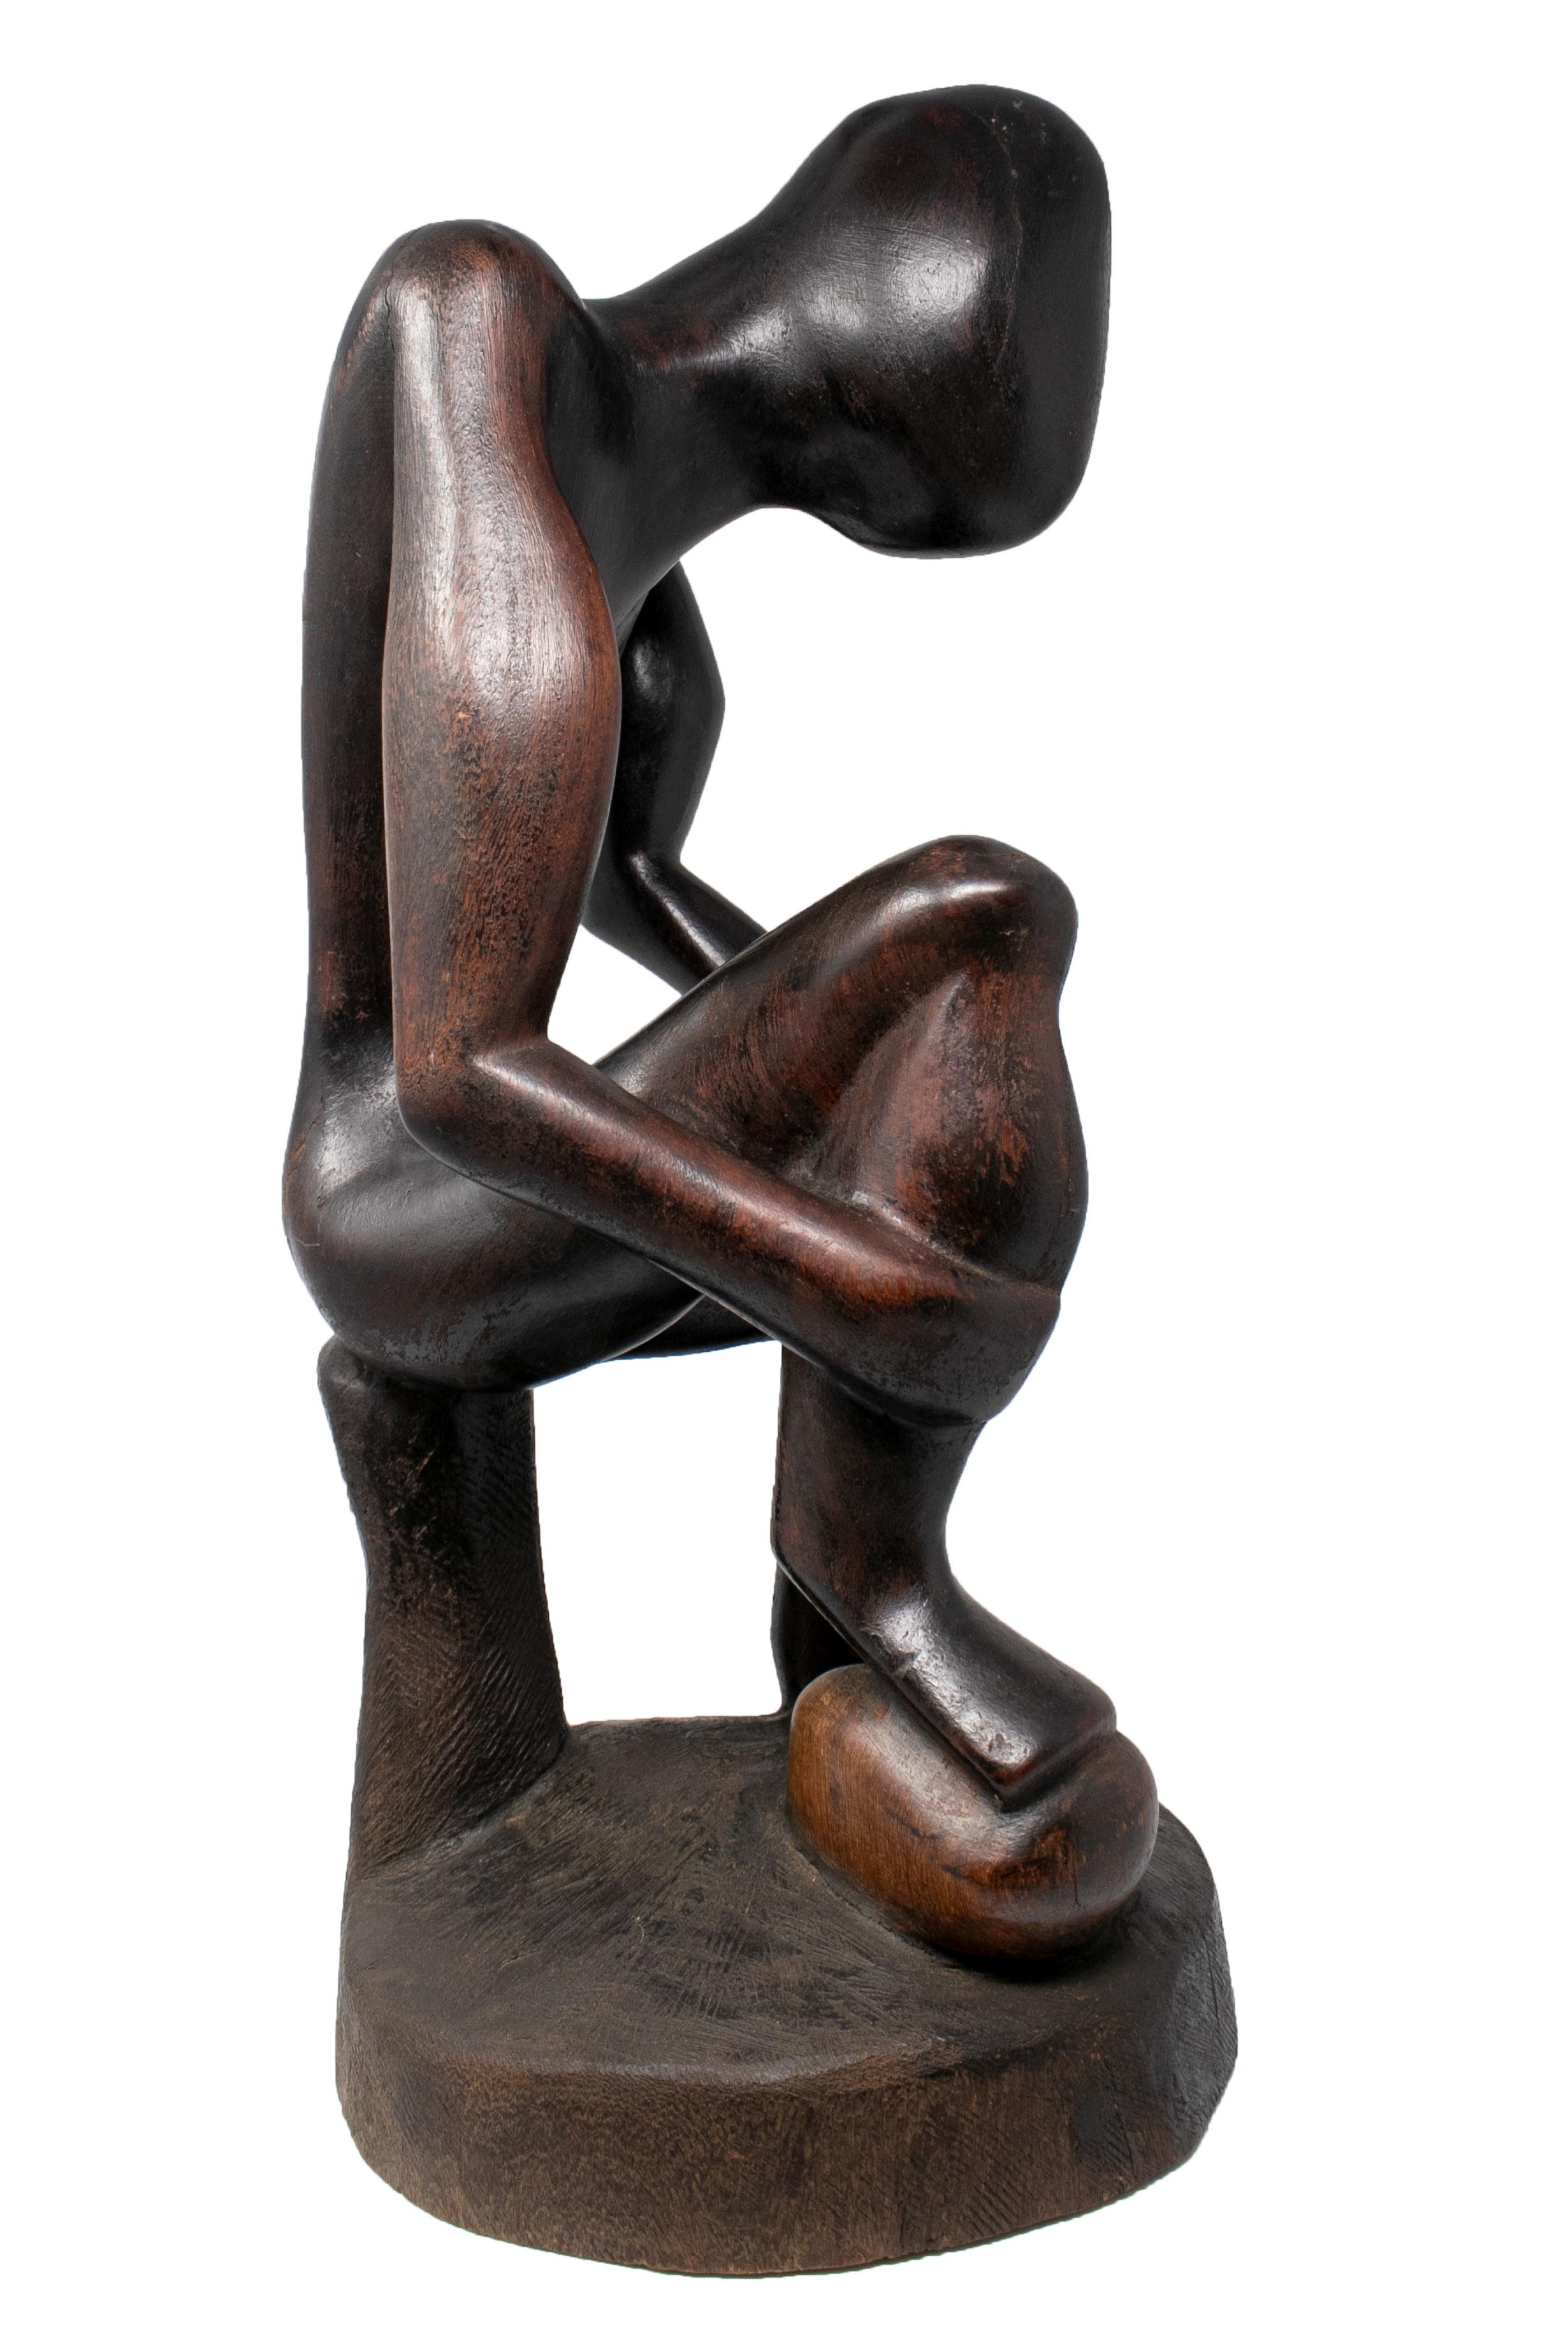 1970s African hand carved wooden sculpture of sitting man.